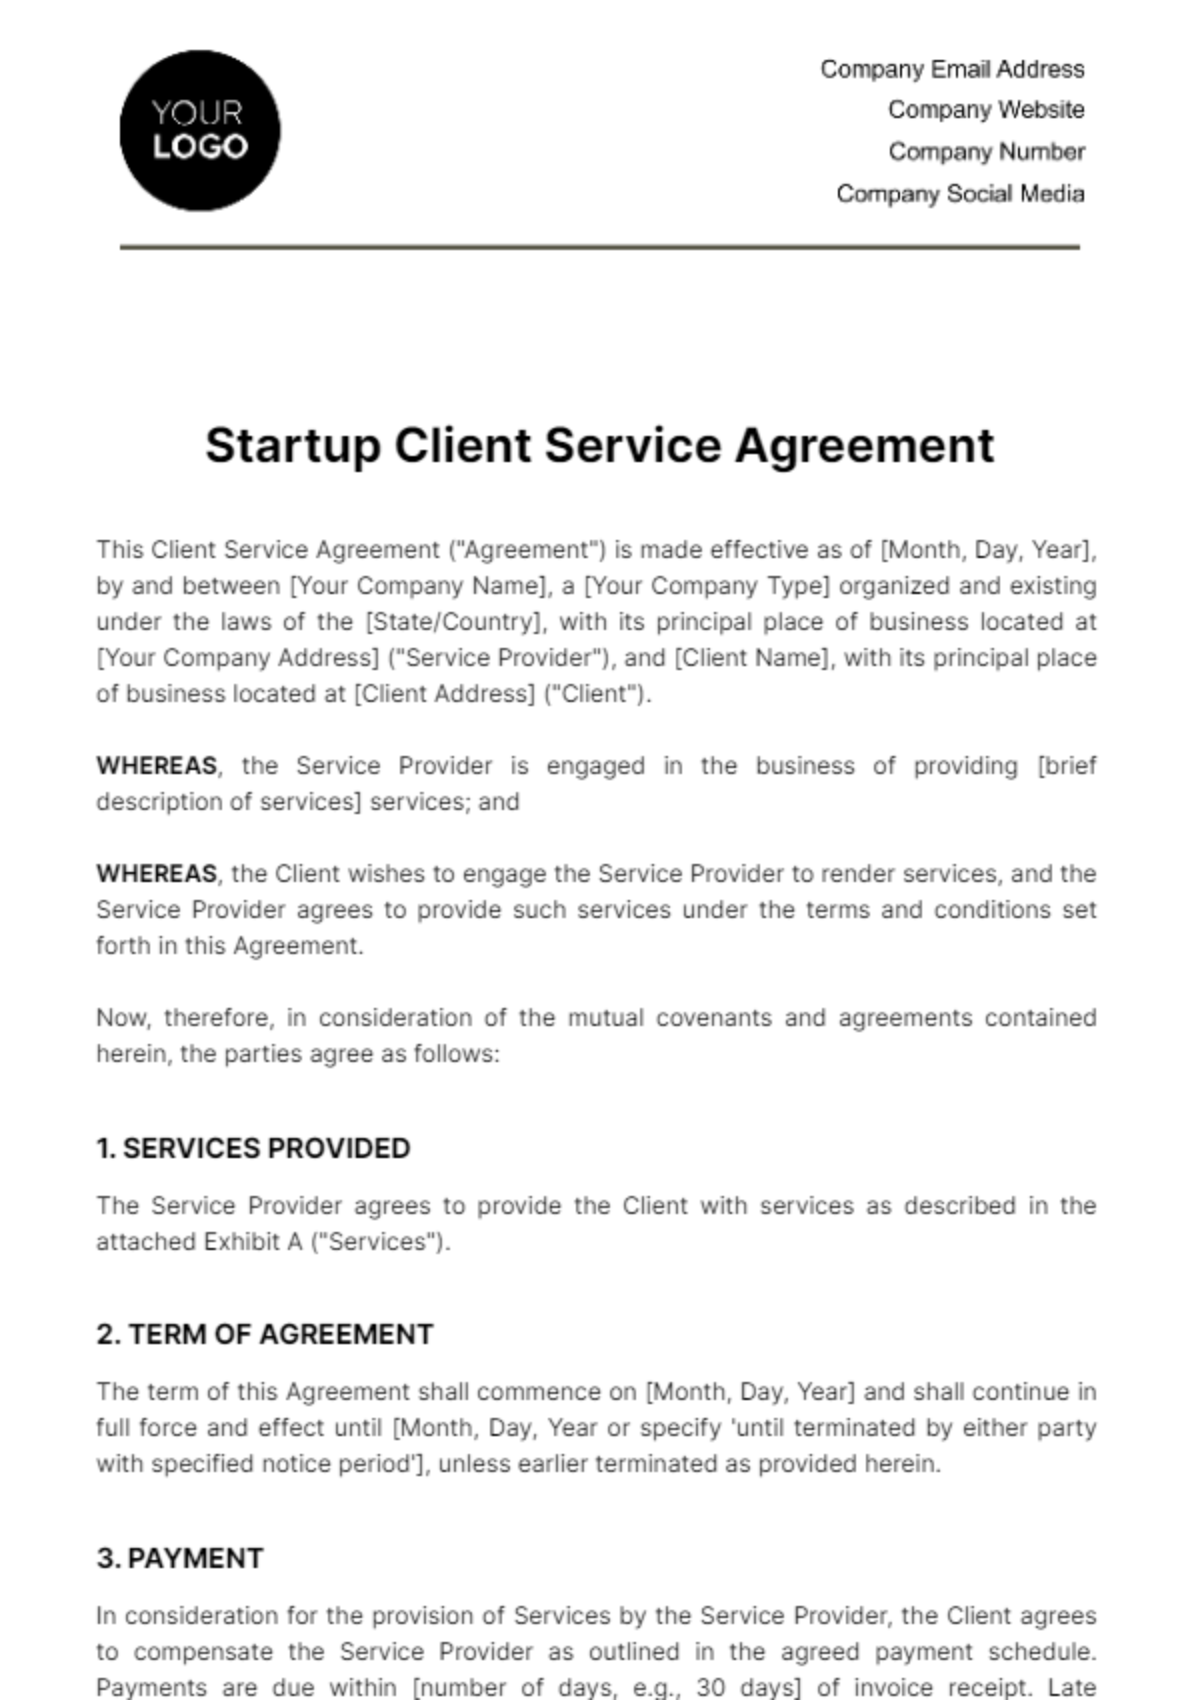 Startup Client Service Agreement Template